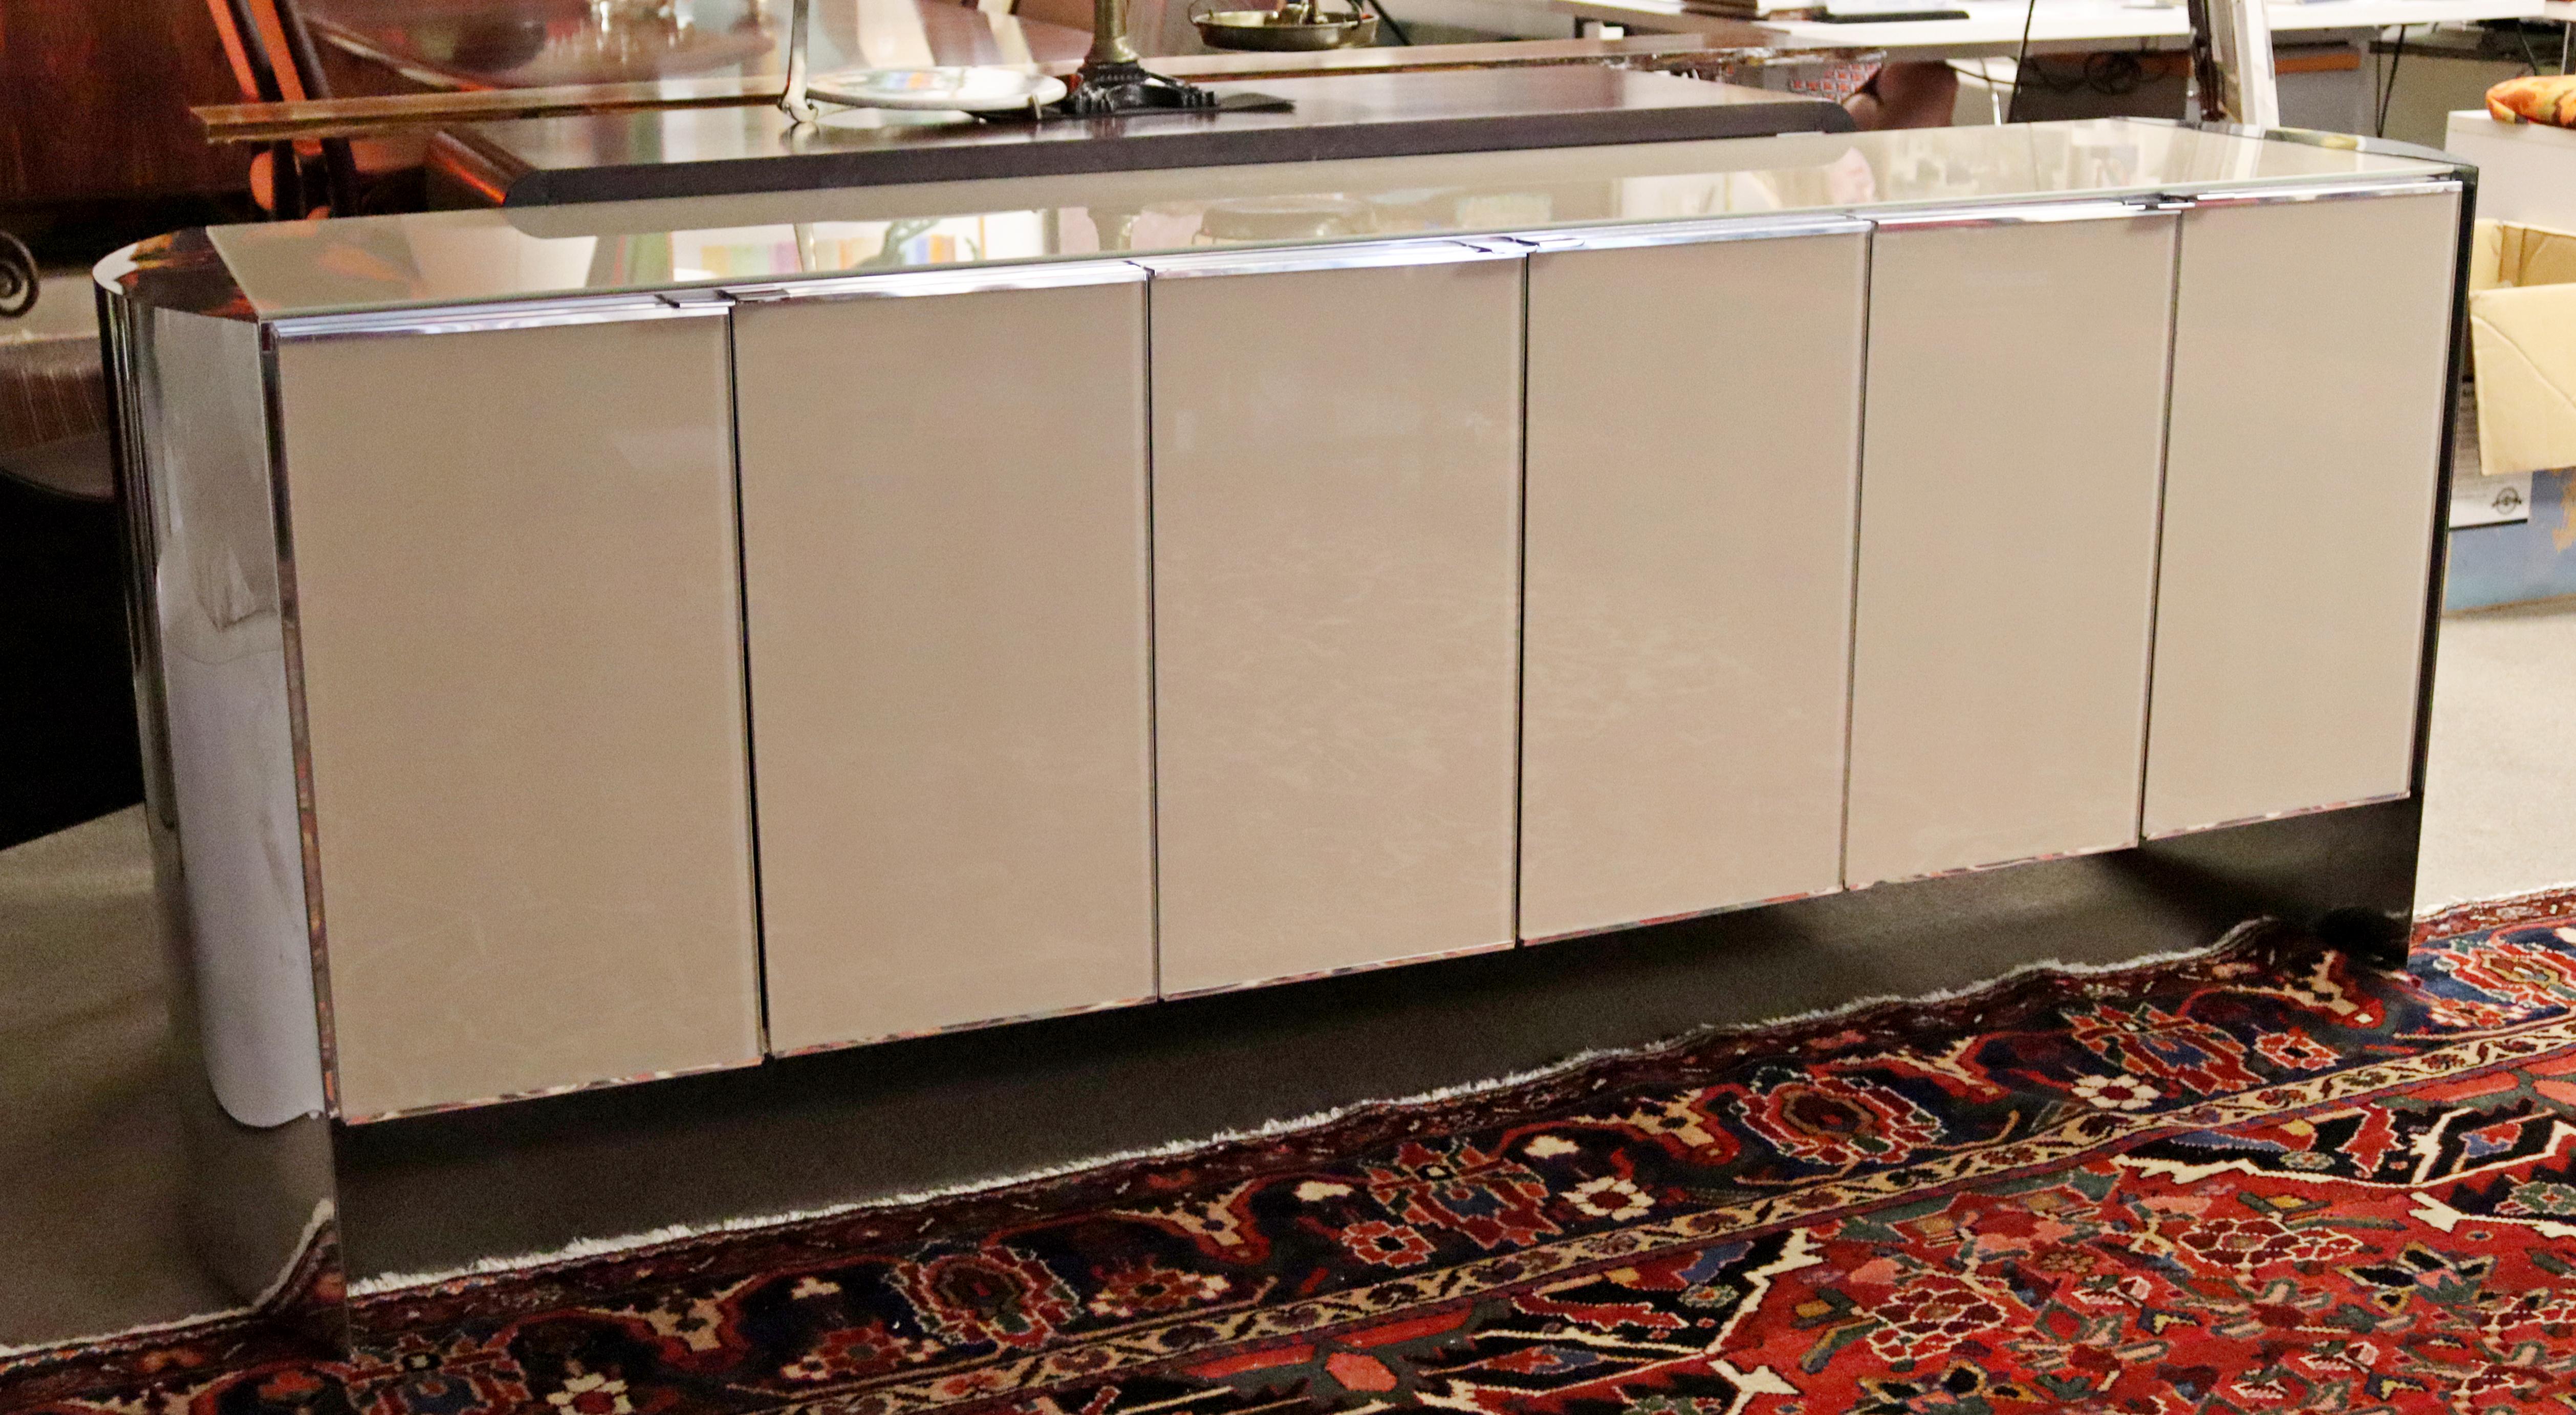 Late 20th Century Contemporary Modern Ello Mirrored Glass & Curved Chrome Credenza Sideboard 1980s